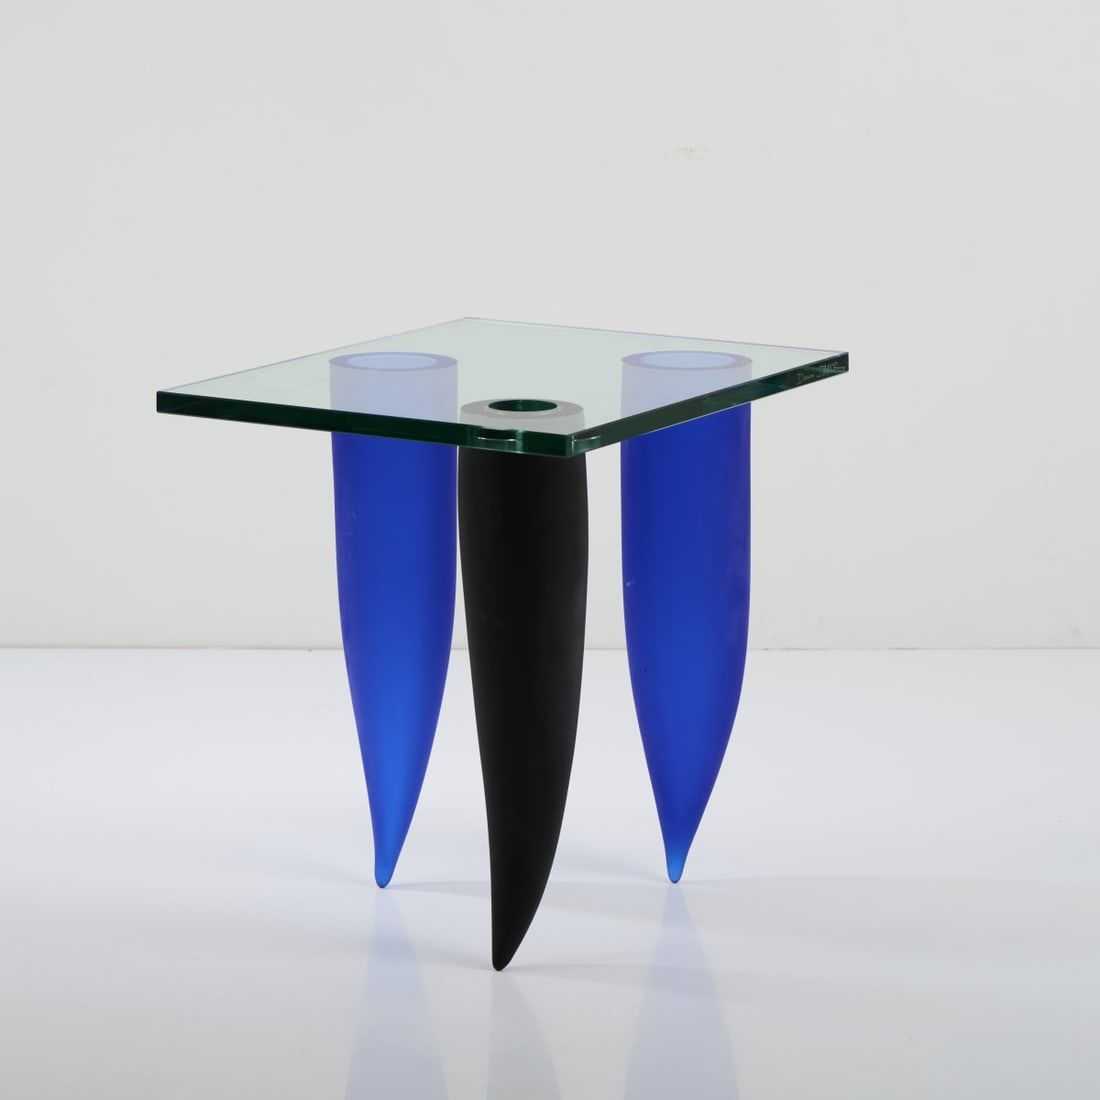 Philippe Starck makes sleek, elite designs available to all